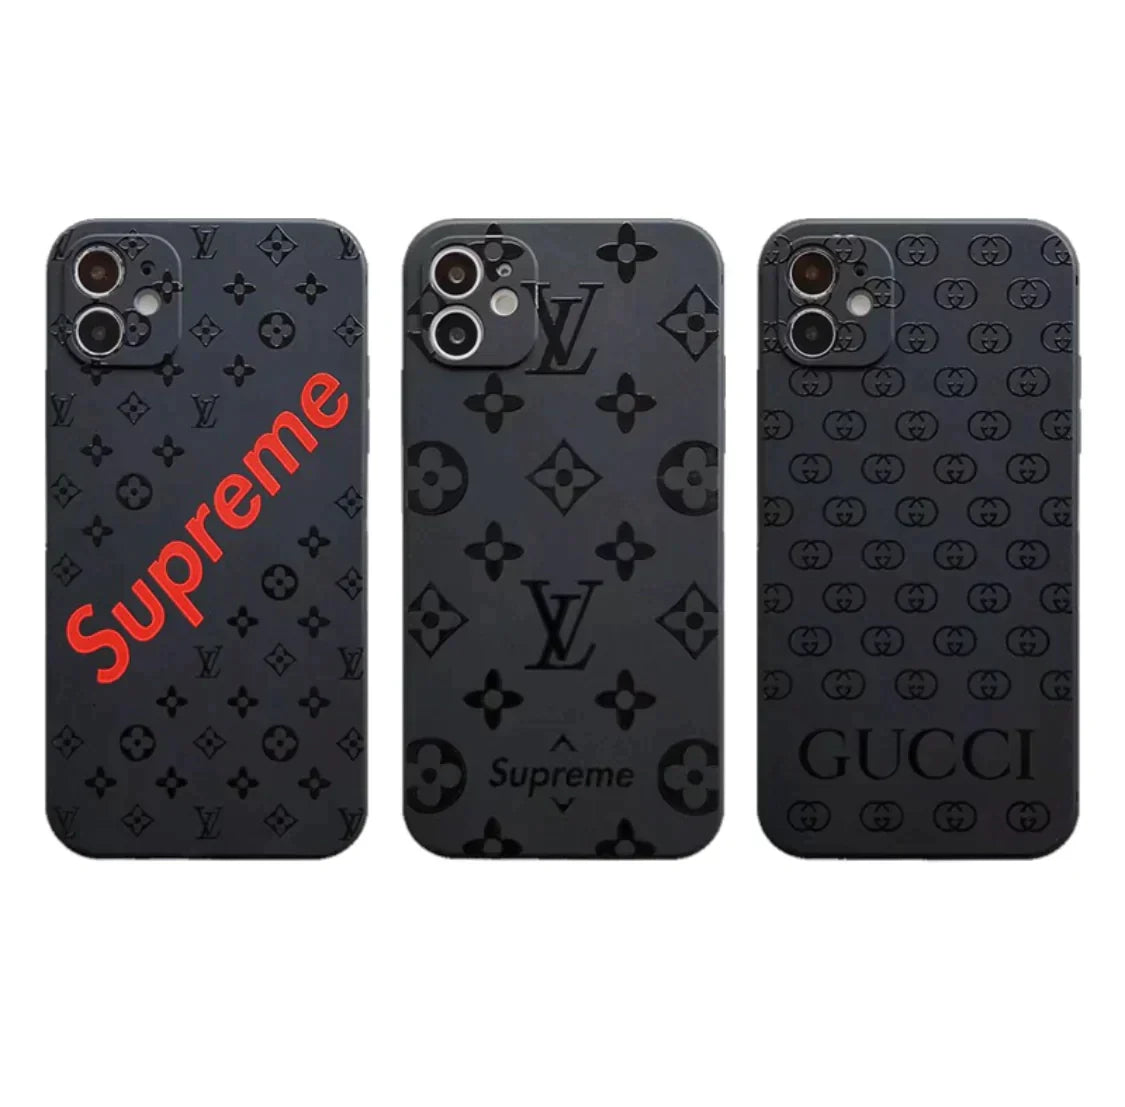 LV Sup GG iPhone Cases - Glamour Gaurd